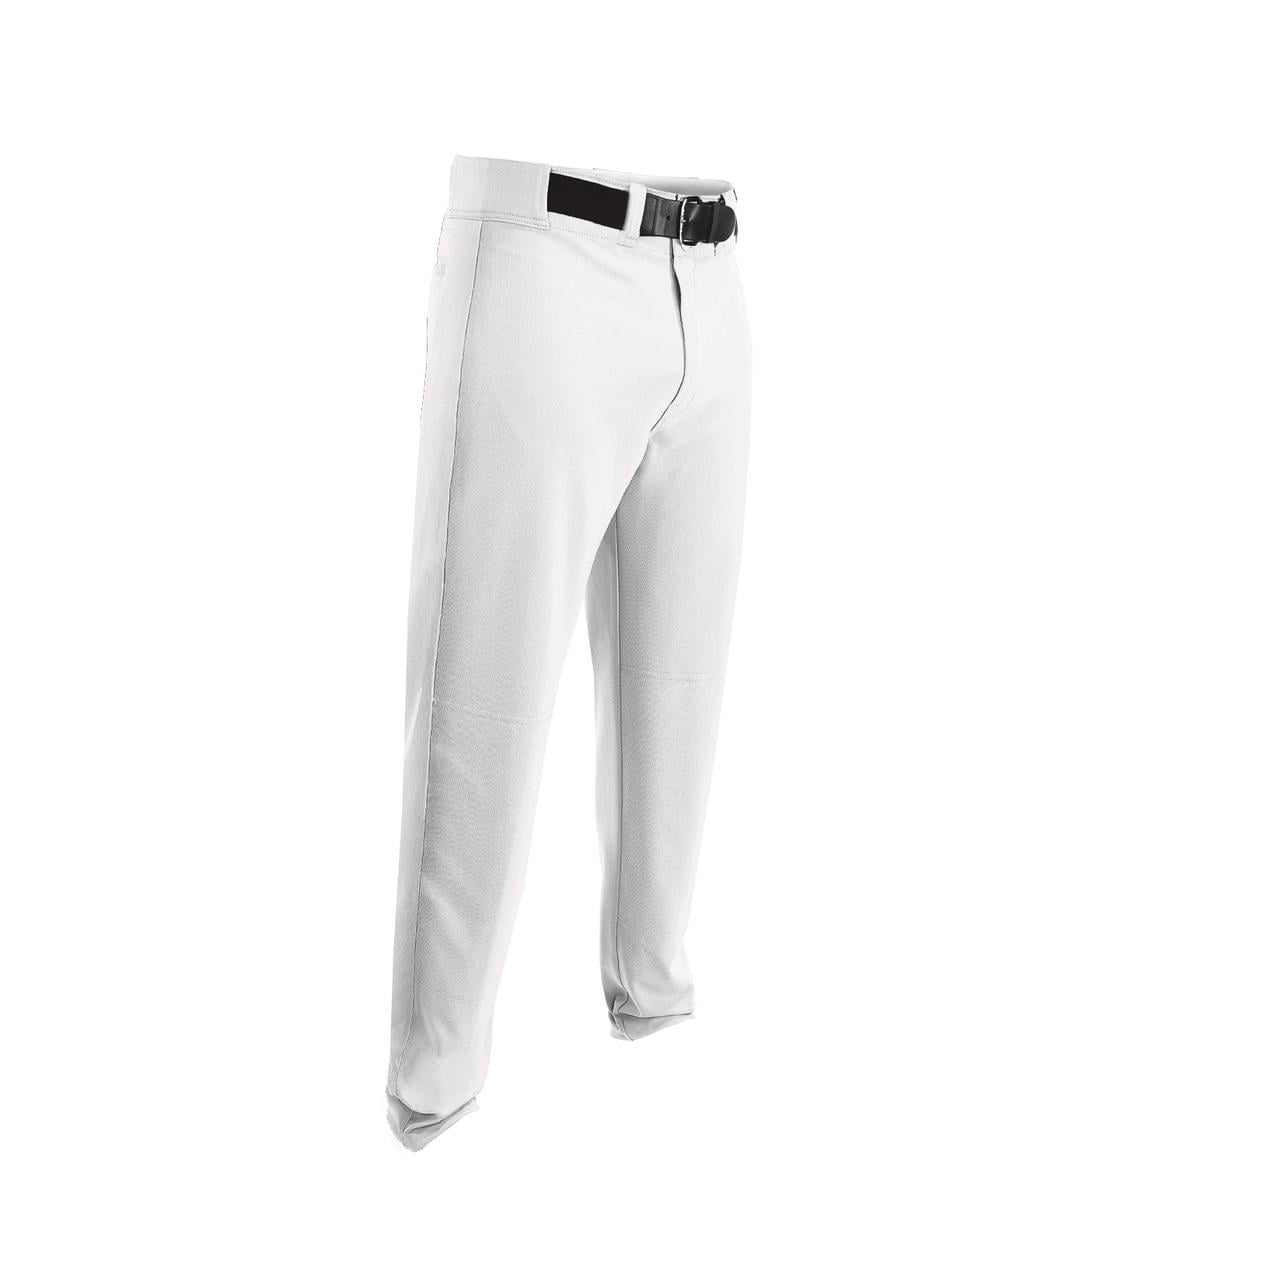 Evoshield EVO Salute Knicker Pant - WH - Baseball Accessories from